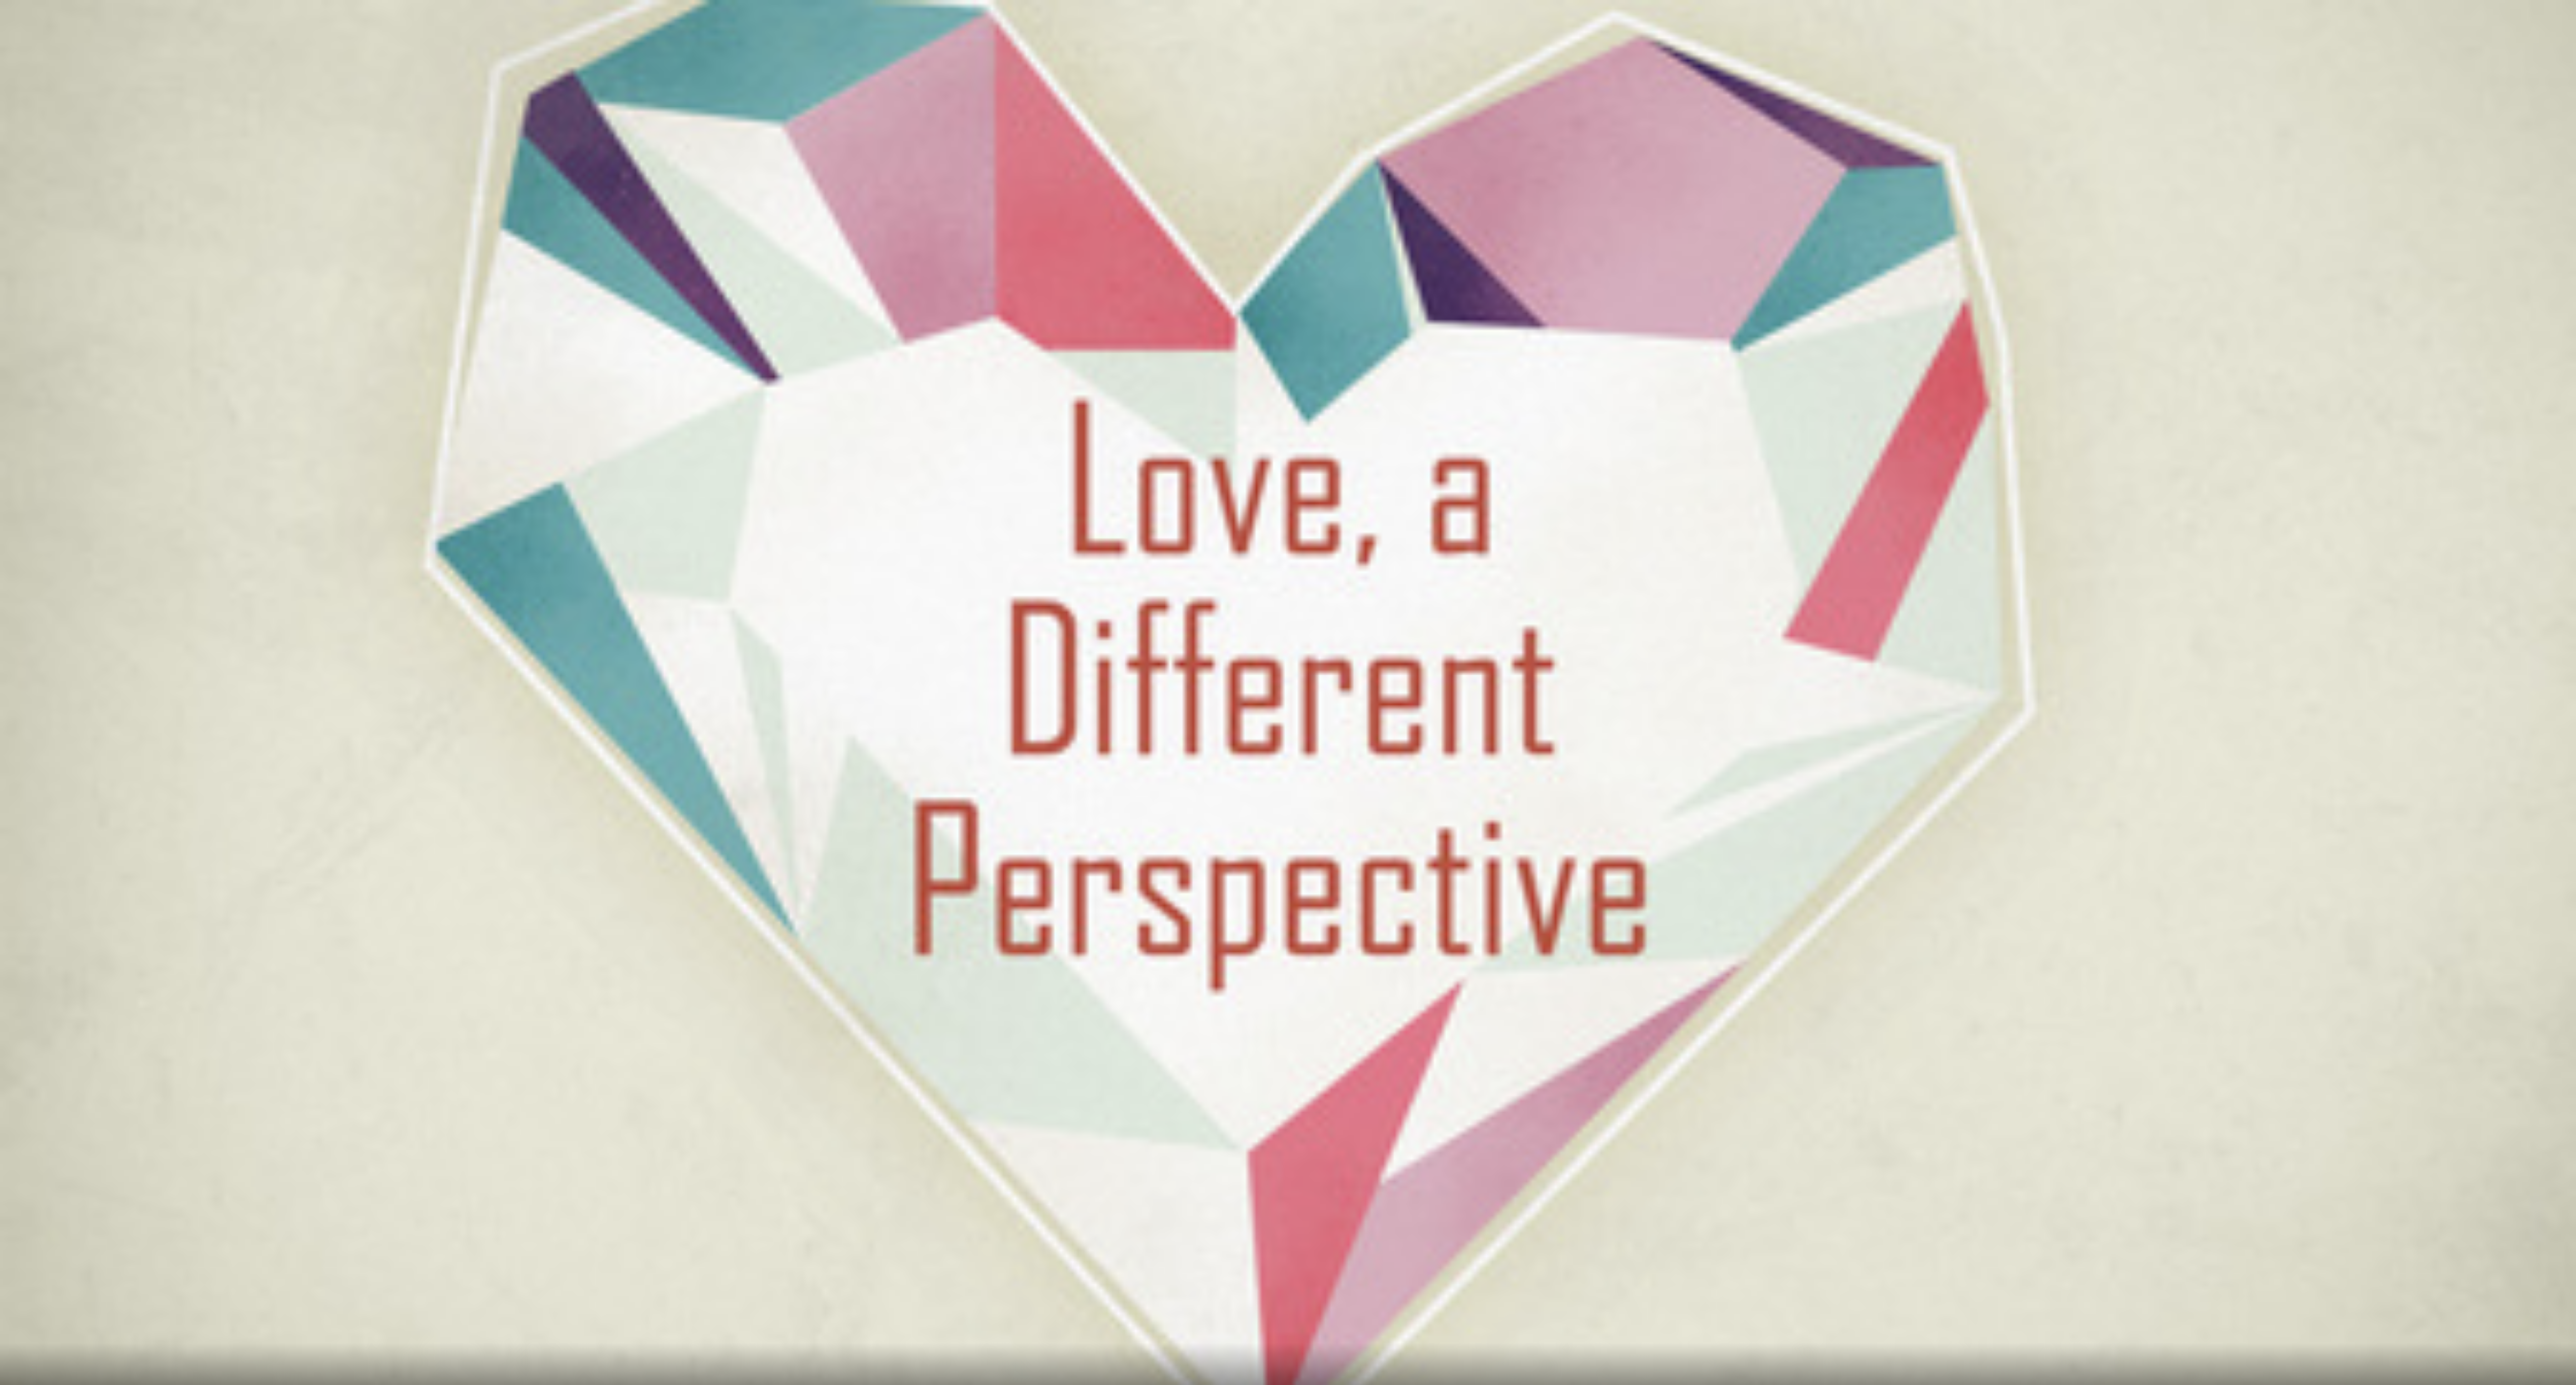 Love, a Different Perspective